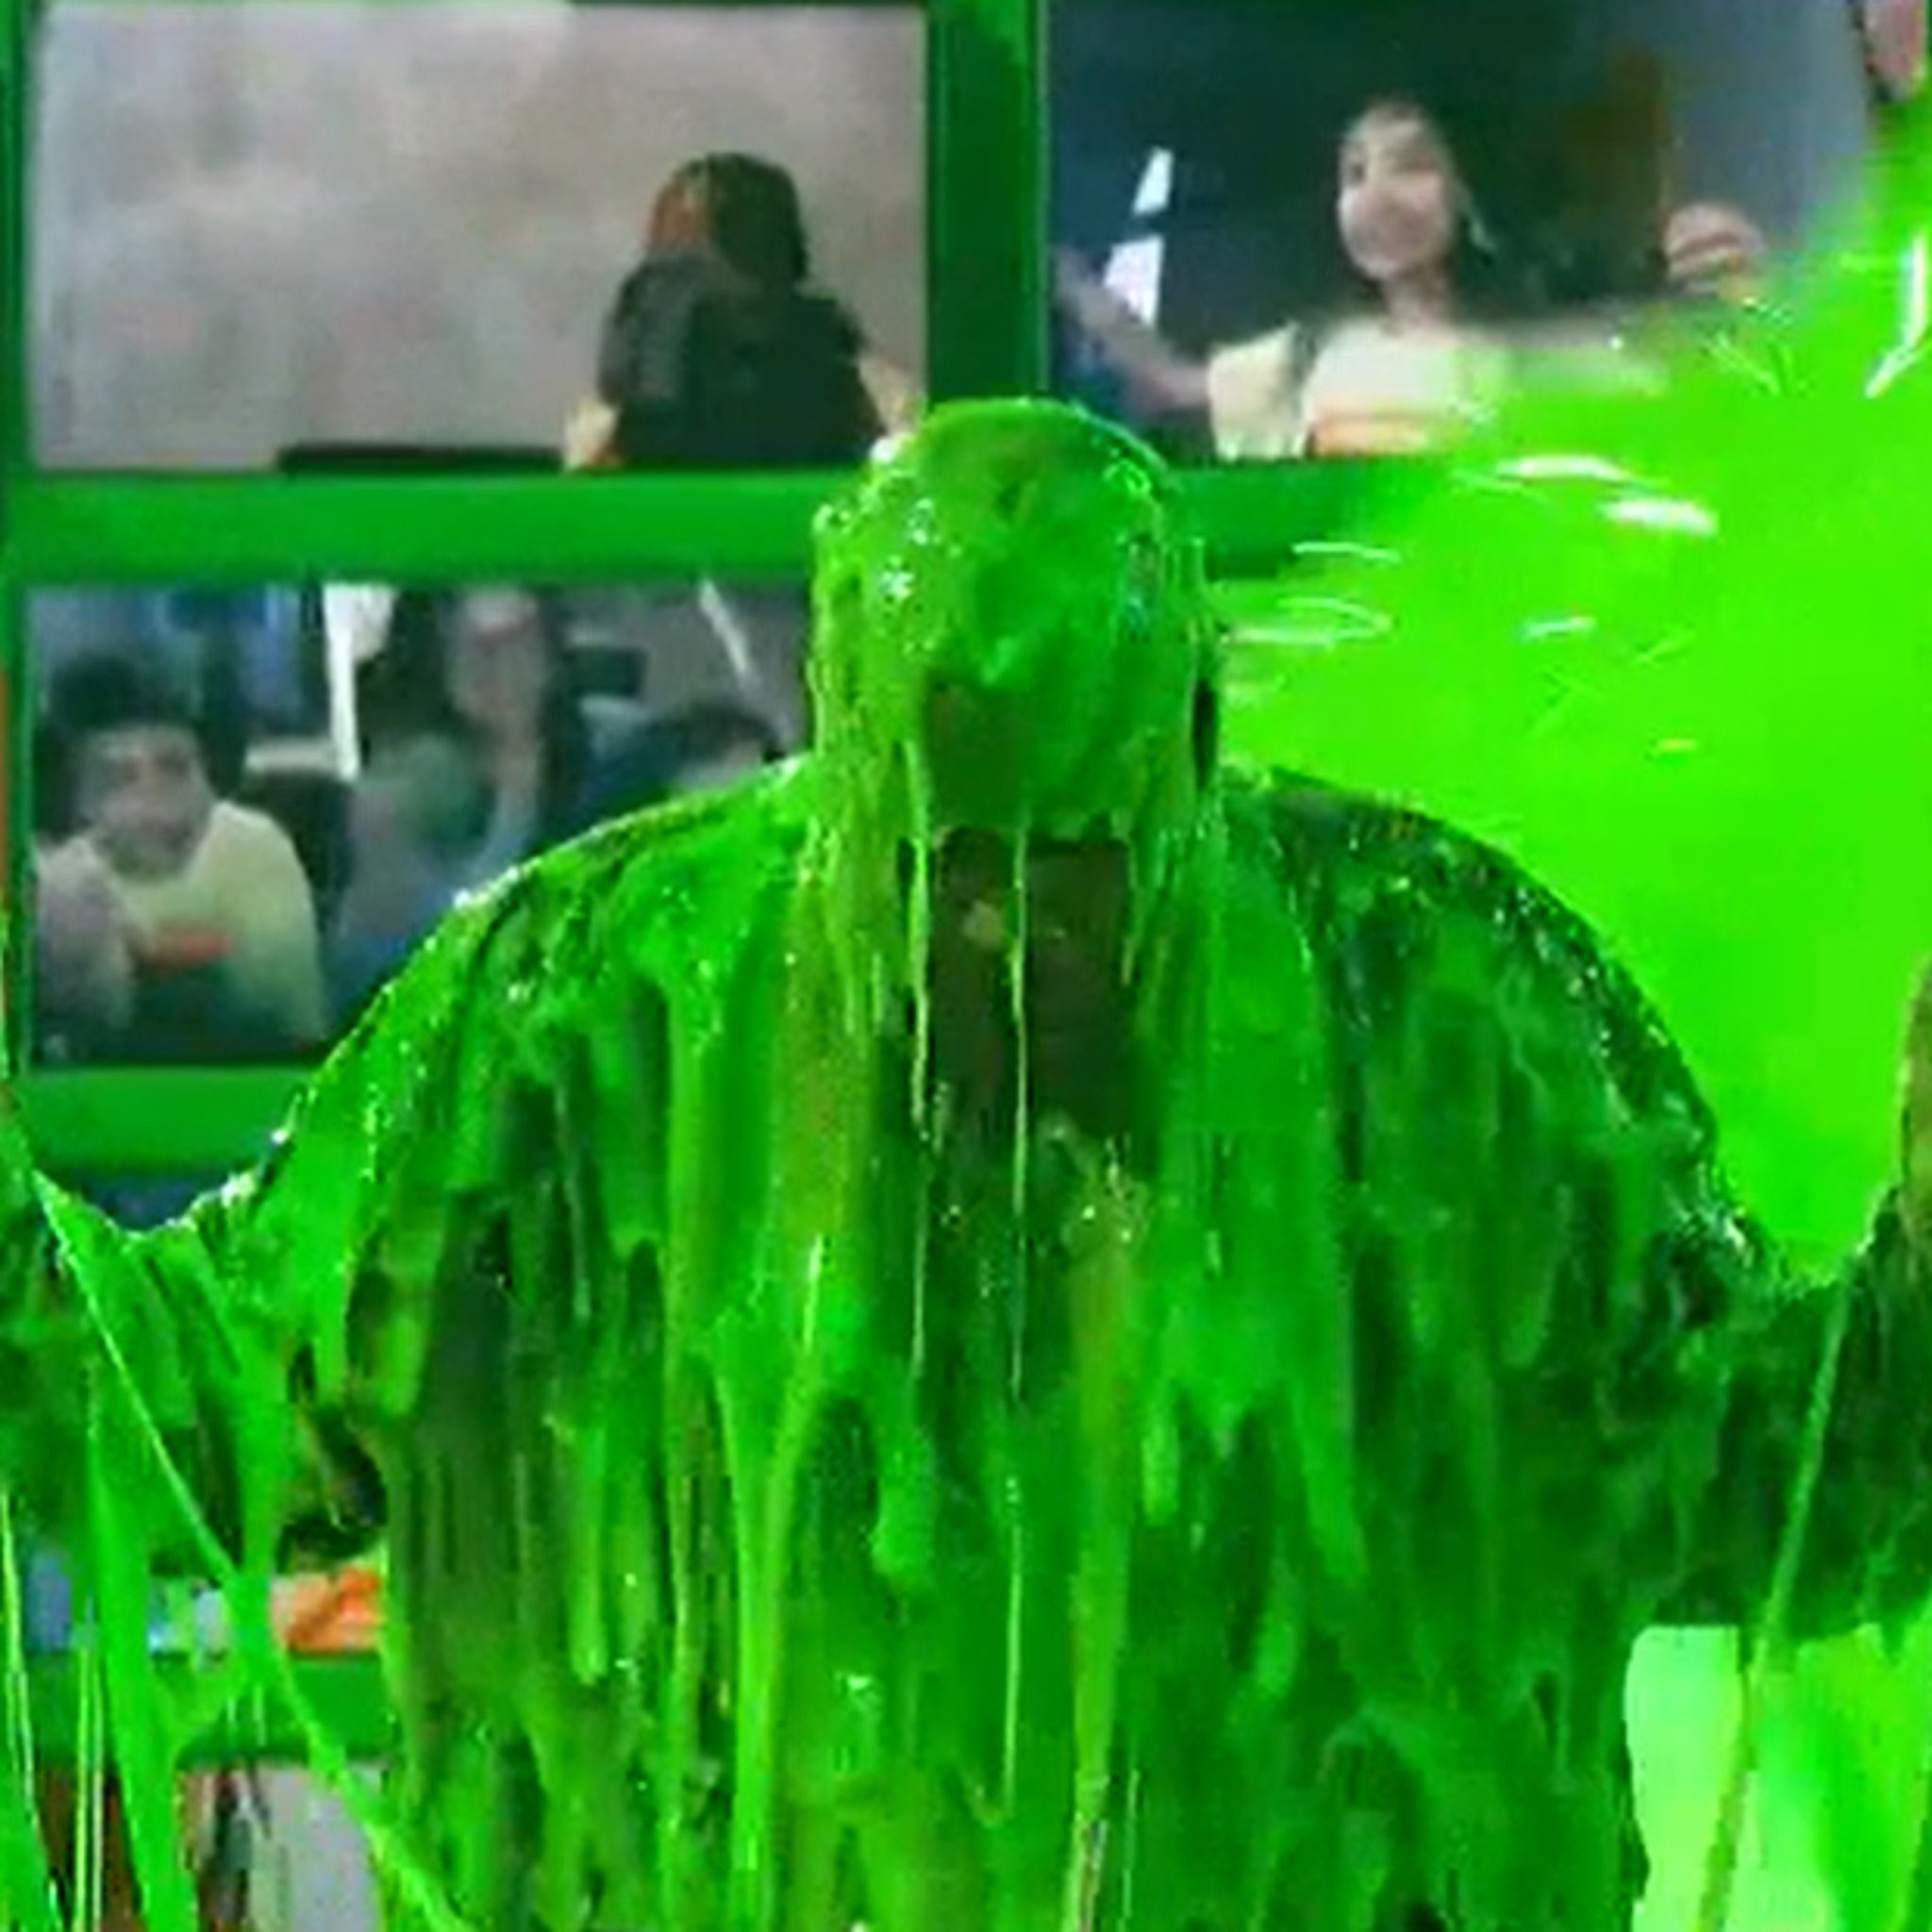 Nickelodeon Kids Choice Awards All The Viral Moments Big Winners And Slime - roblox slime event 2021